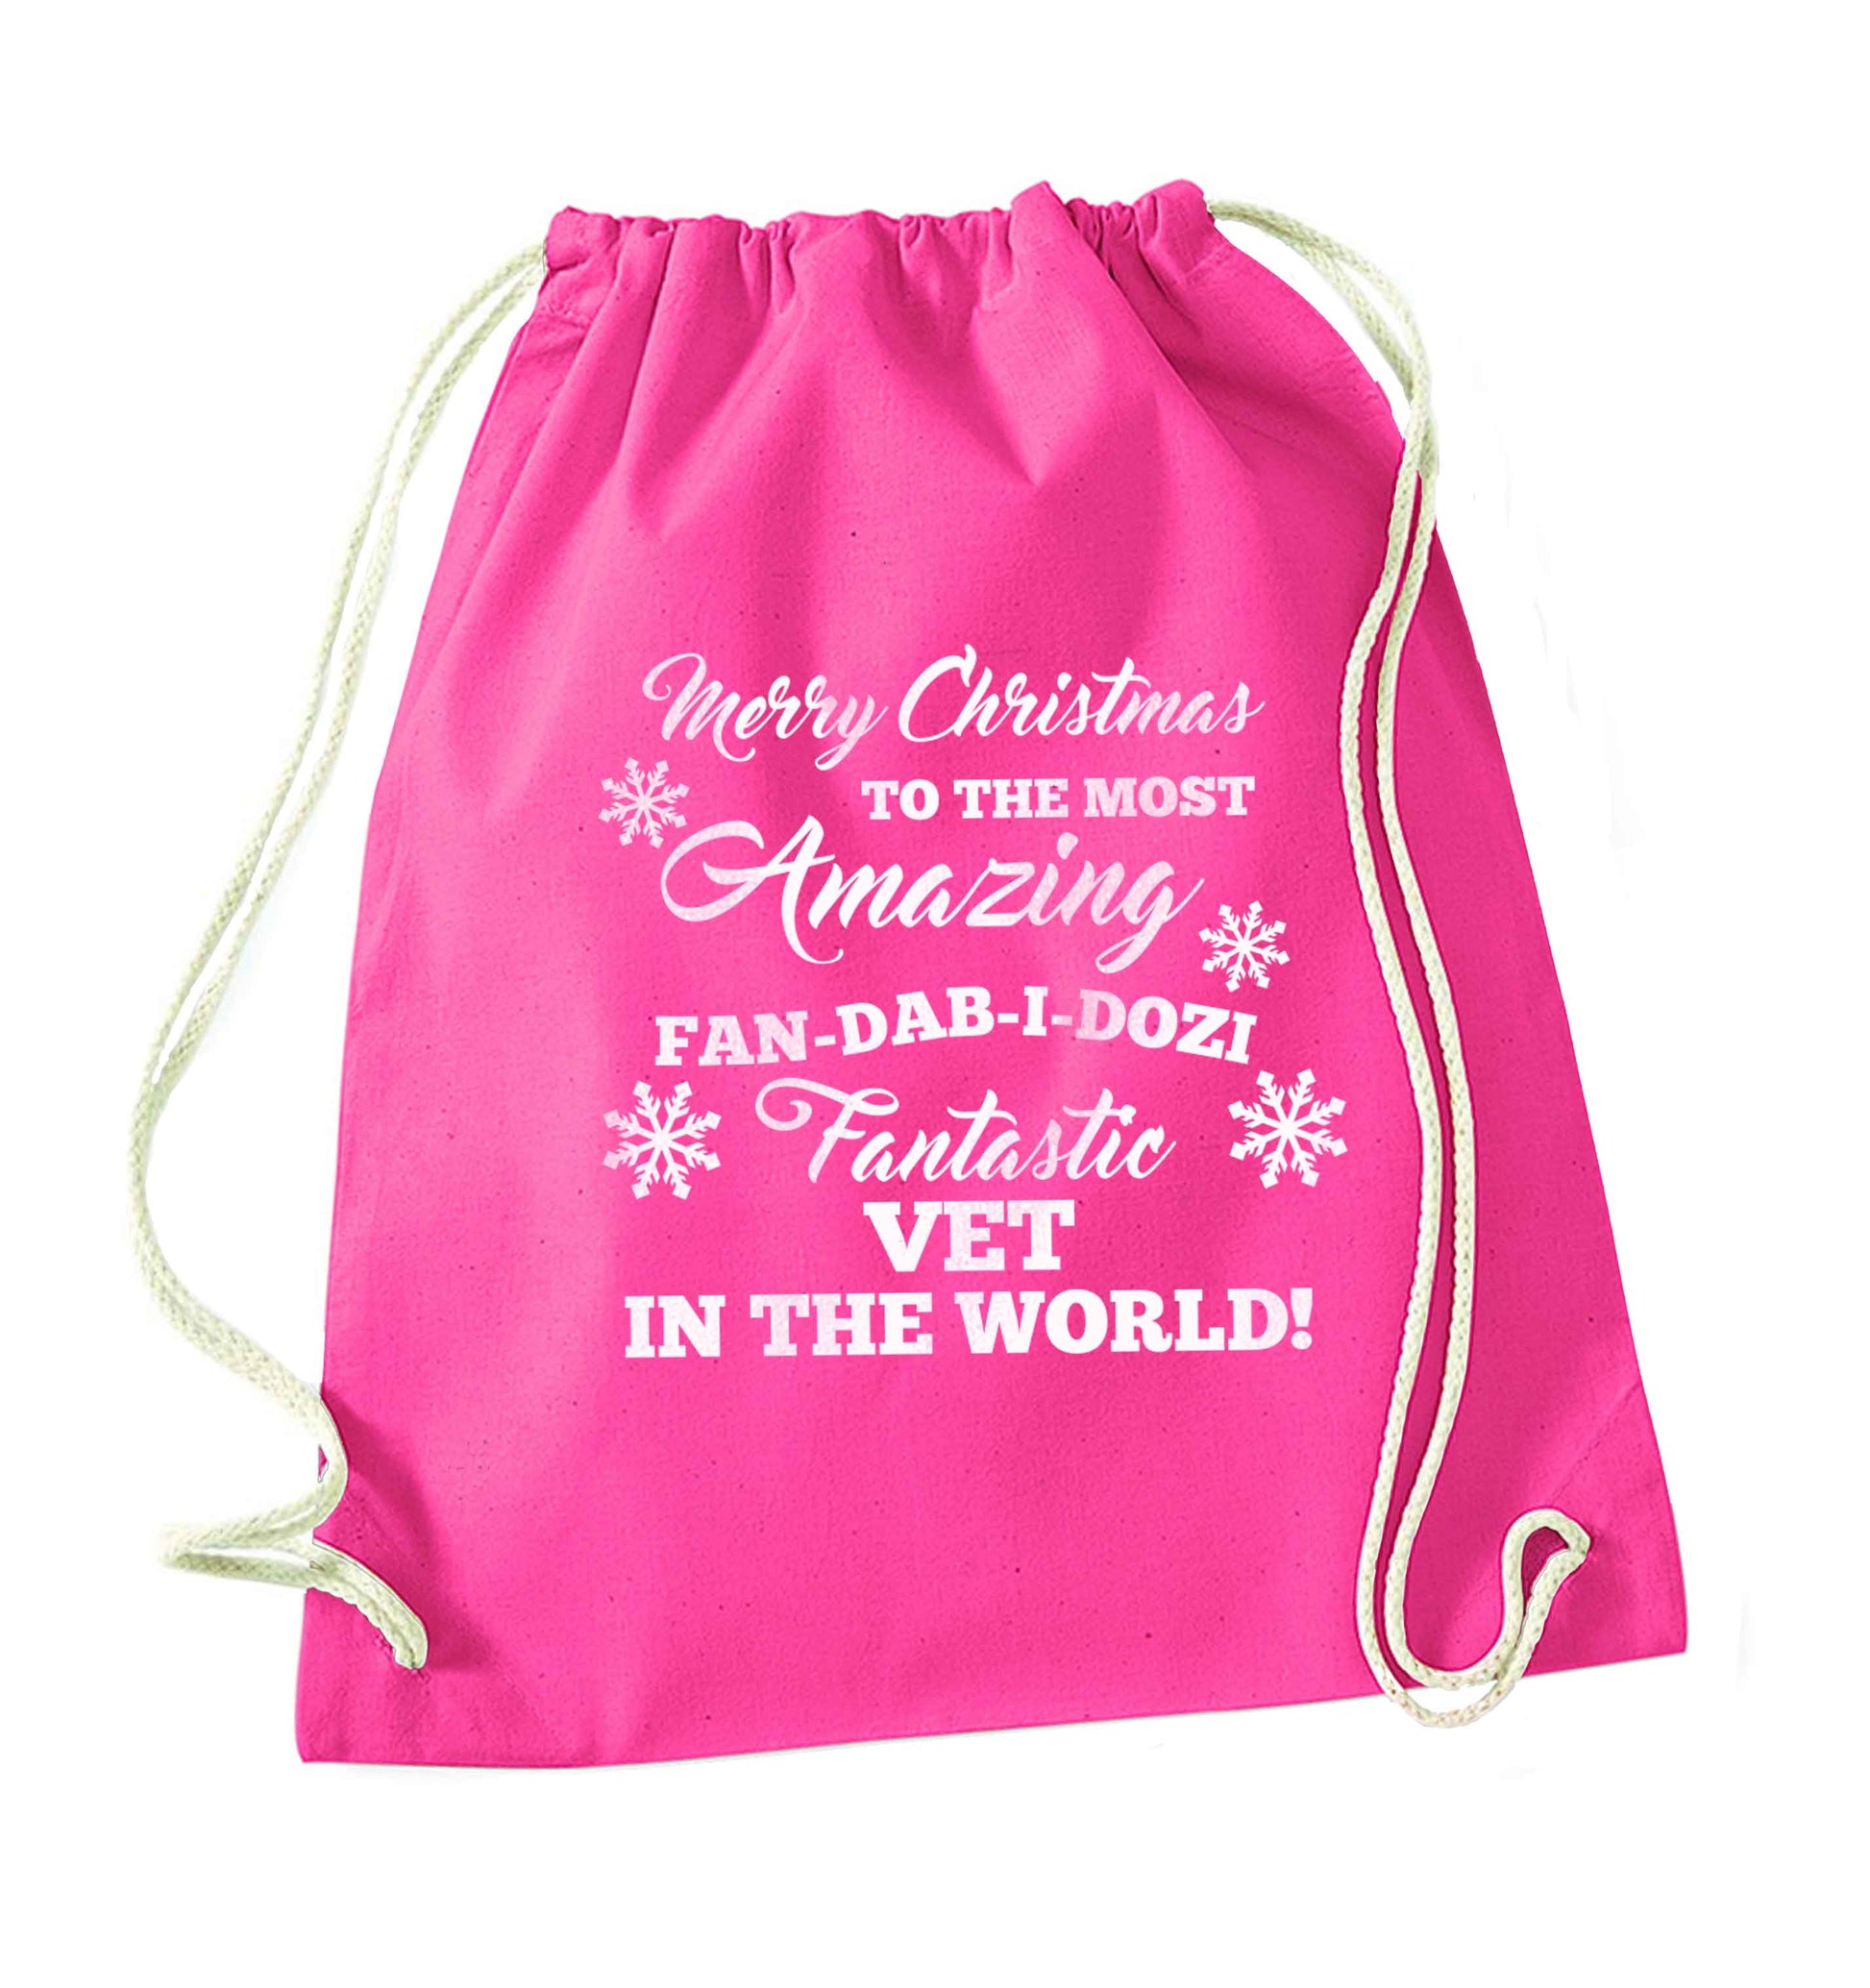 Merry Christmas to the most amazing vet in the world! pink drawstring bag